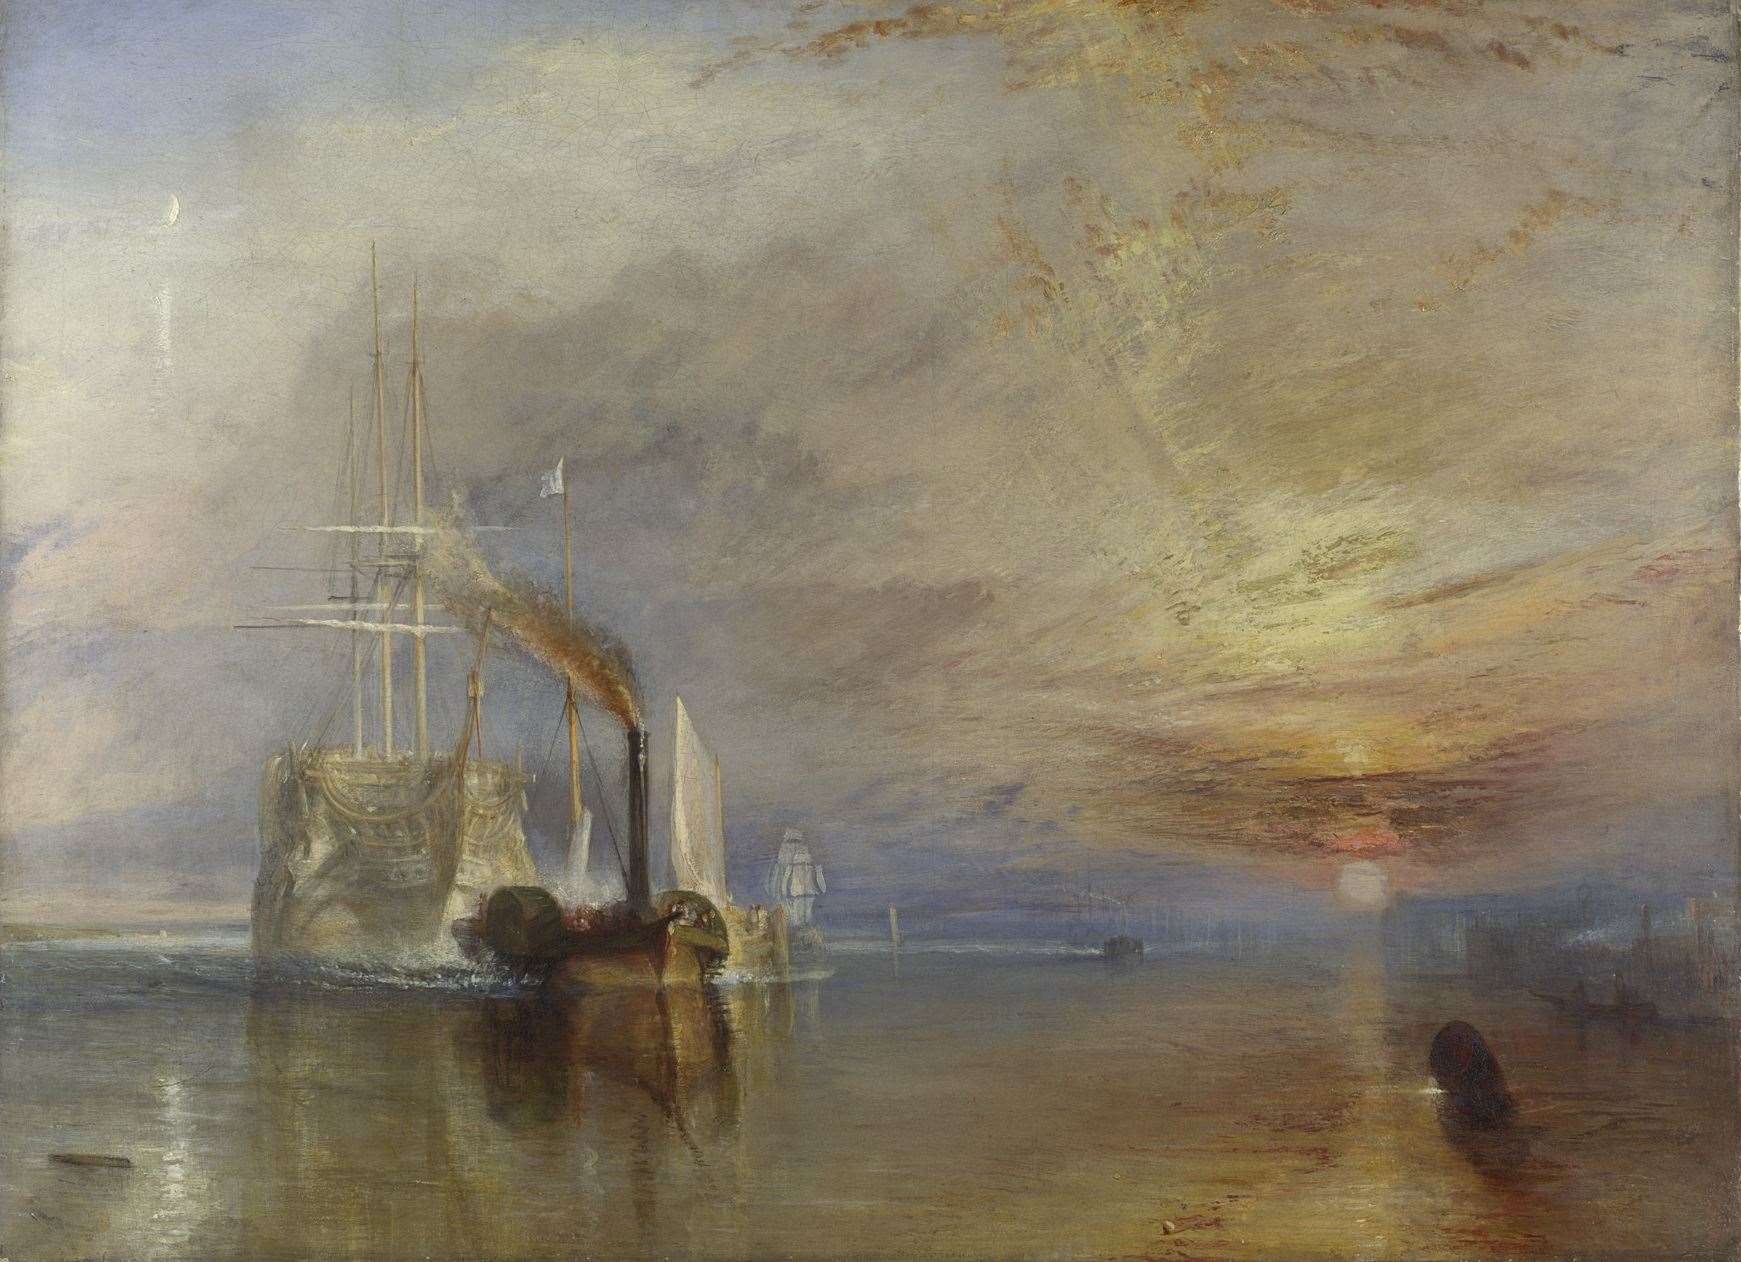 Turner's original painting of The Fighting Temeraire. Picture: The National Gallery